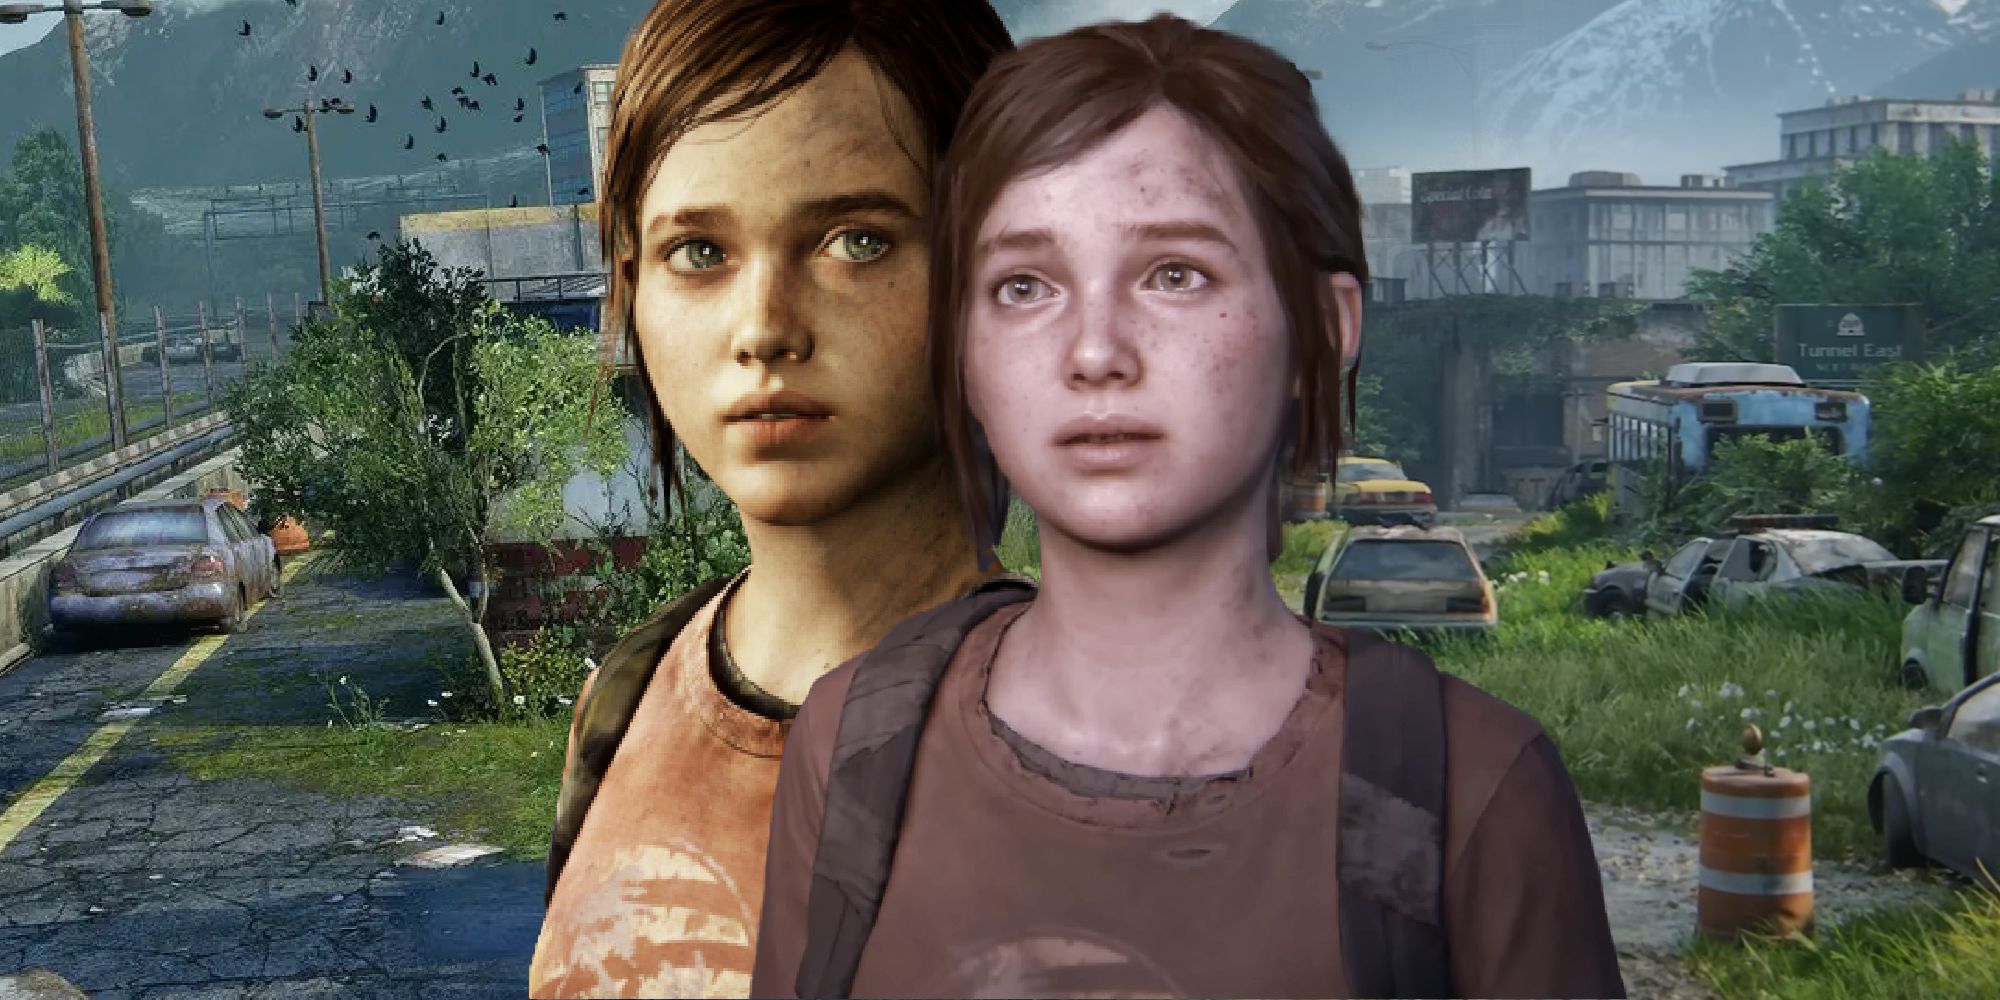 The Last Of Us Part 1's Remake Isn't Better, It's Only Different